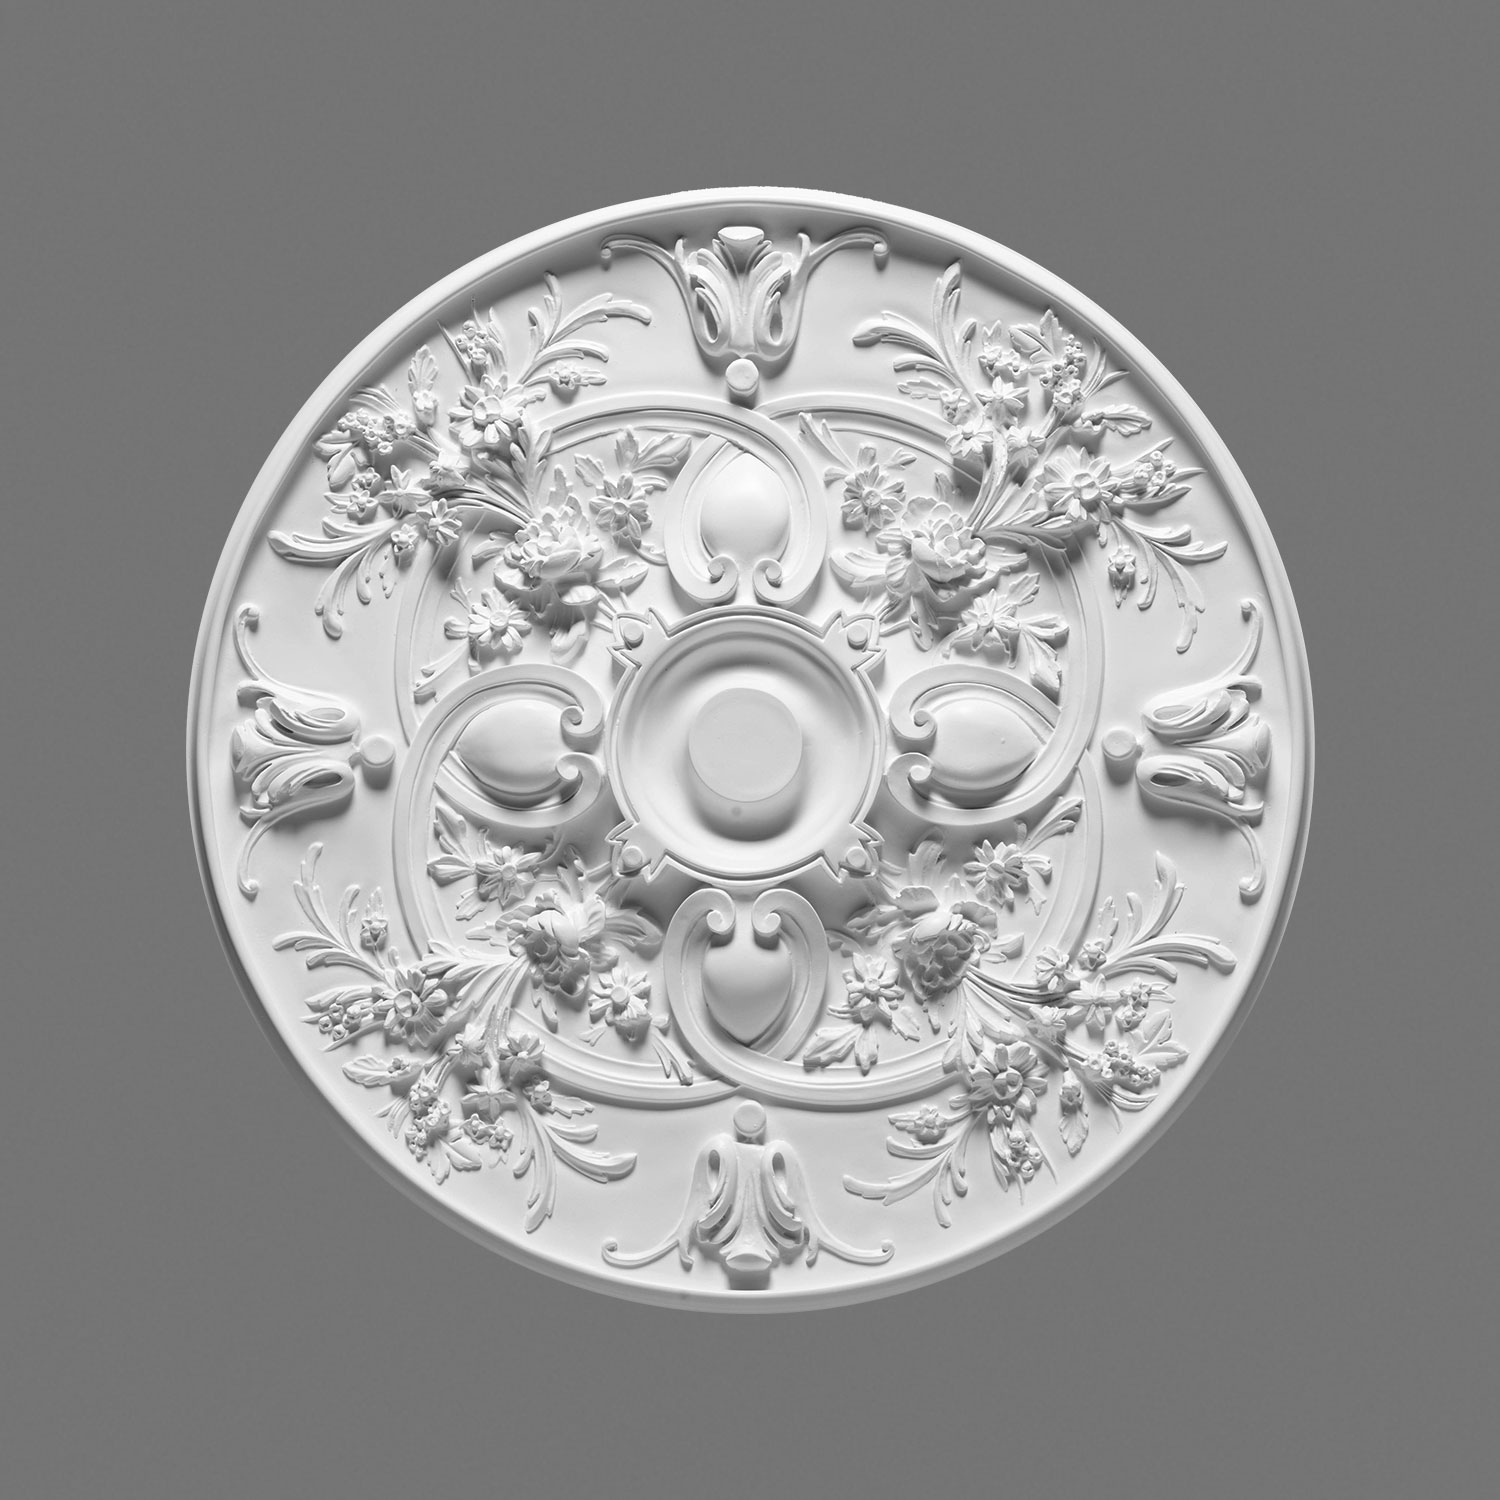 PRIMED BLANC ROND R61 ORAC Decor Canopy Dome large environ 38.10 cm Plafond Medallion 15 in